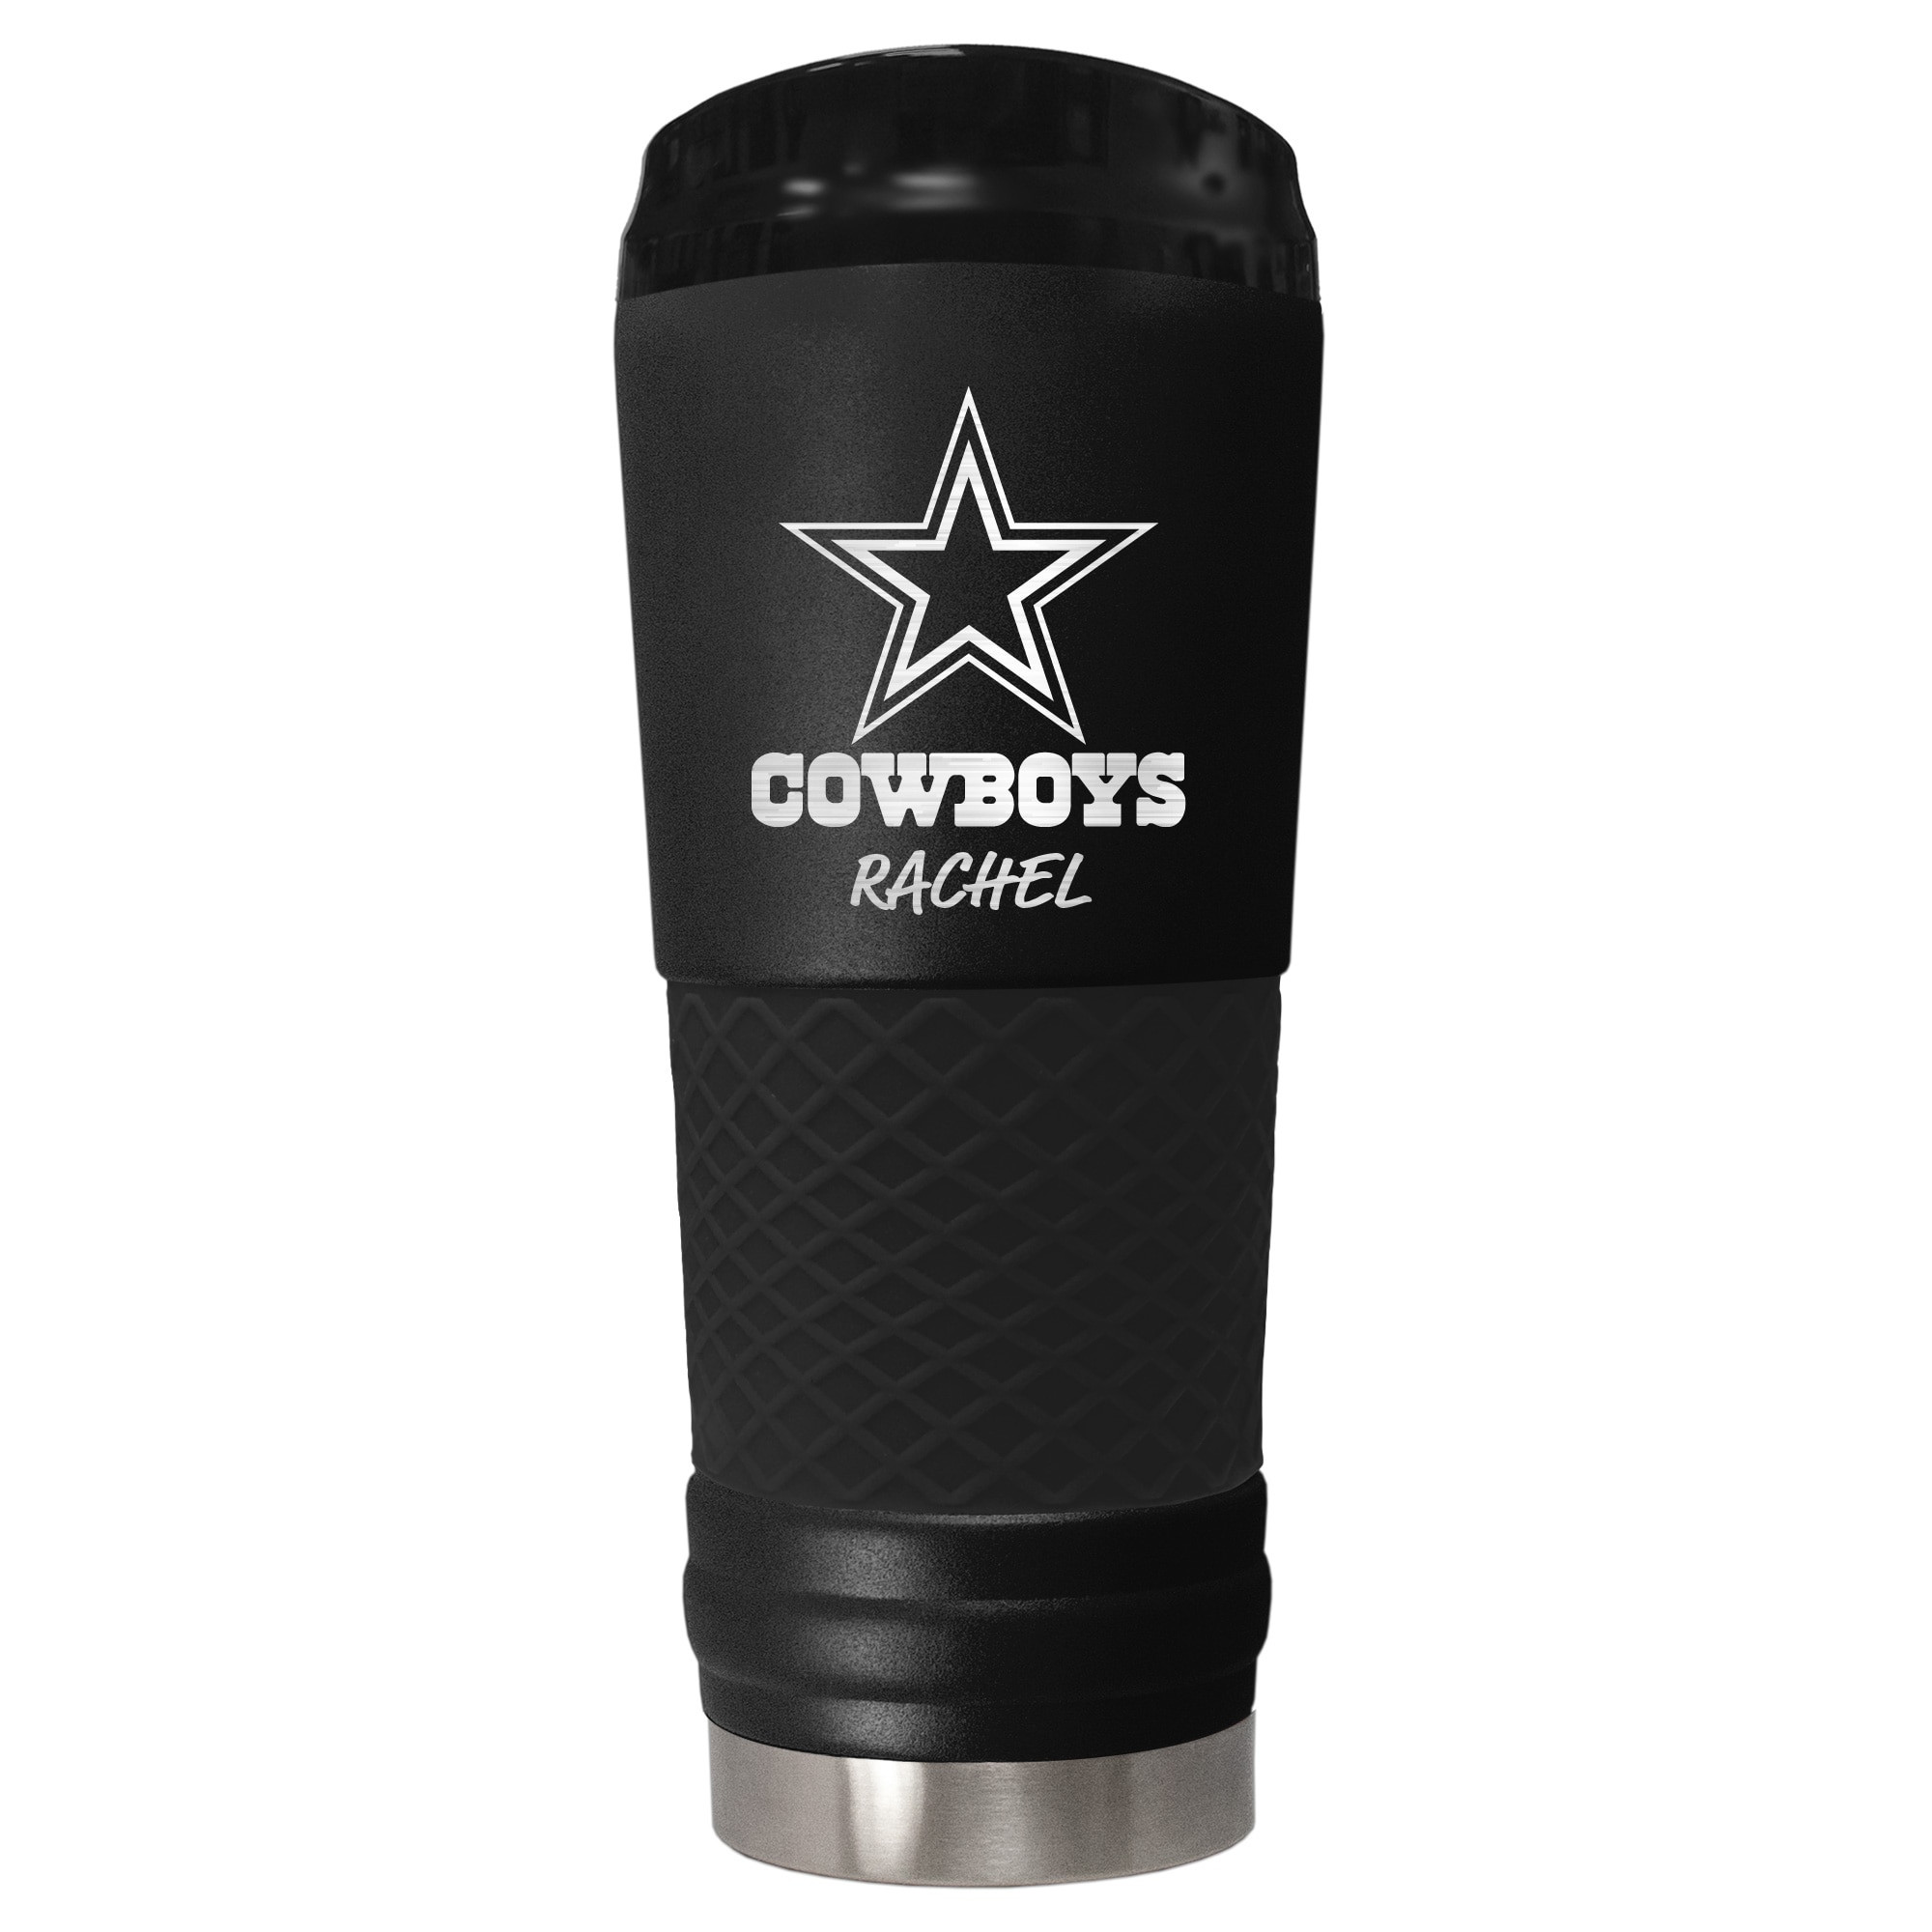 Gift Ideas For Cowboys
 15 Cool Gift Ideas for Dallas Cowboys Fans in 2021